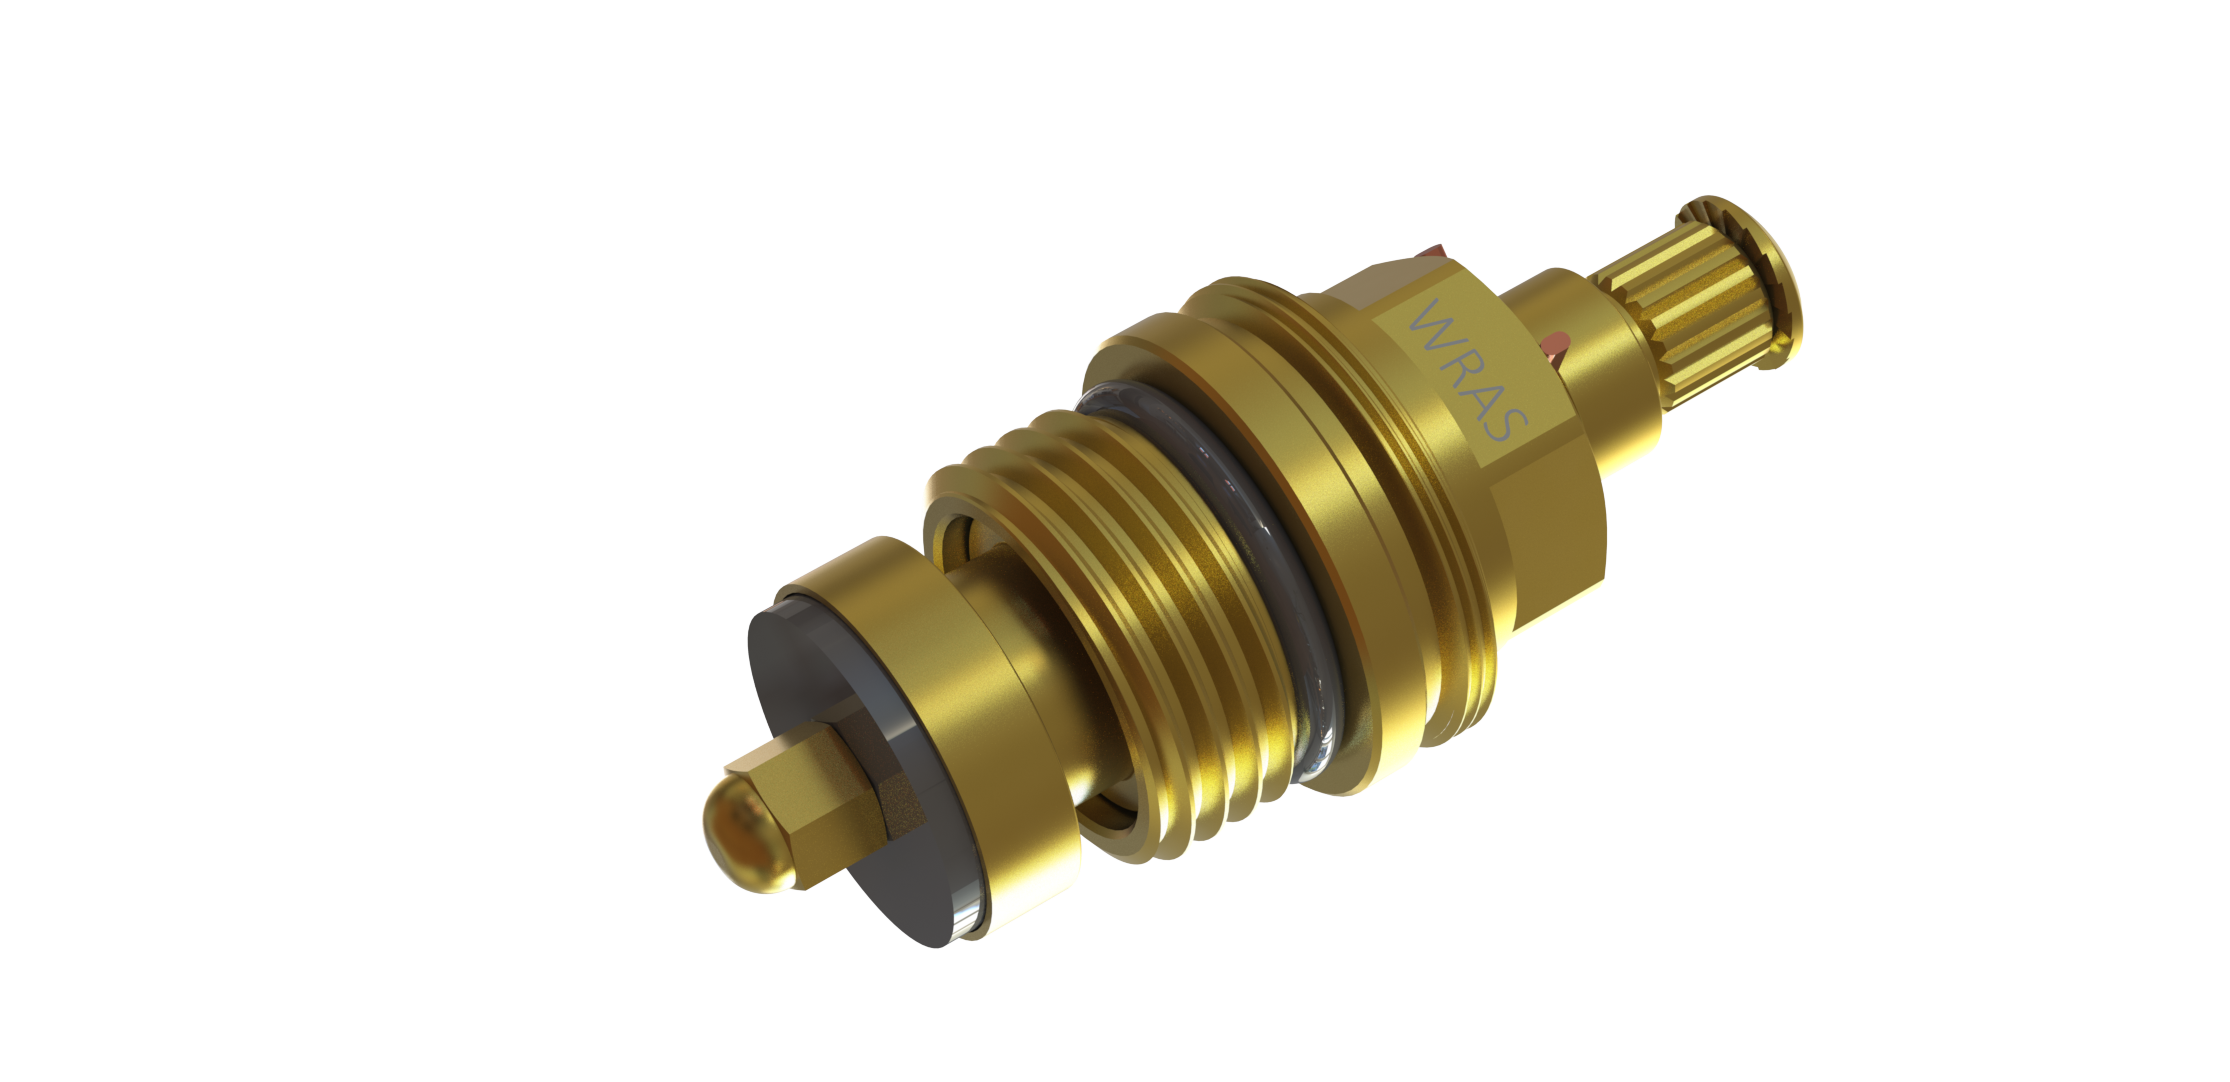 HALF INCH THREAD TAP GLAND WITH THREADED COLLAR 002.png